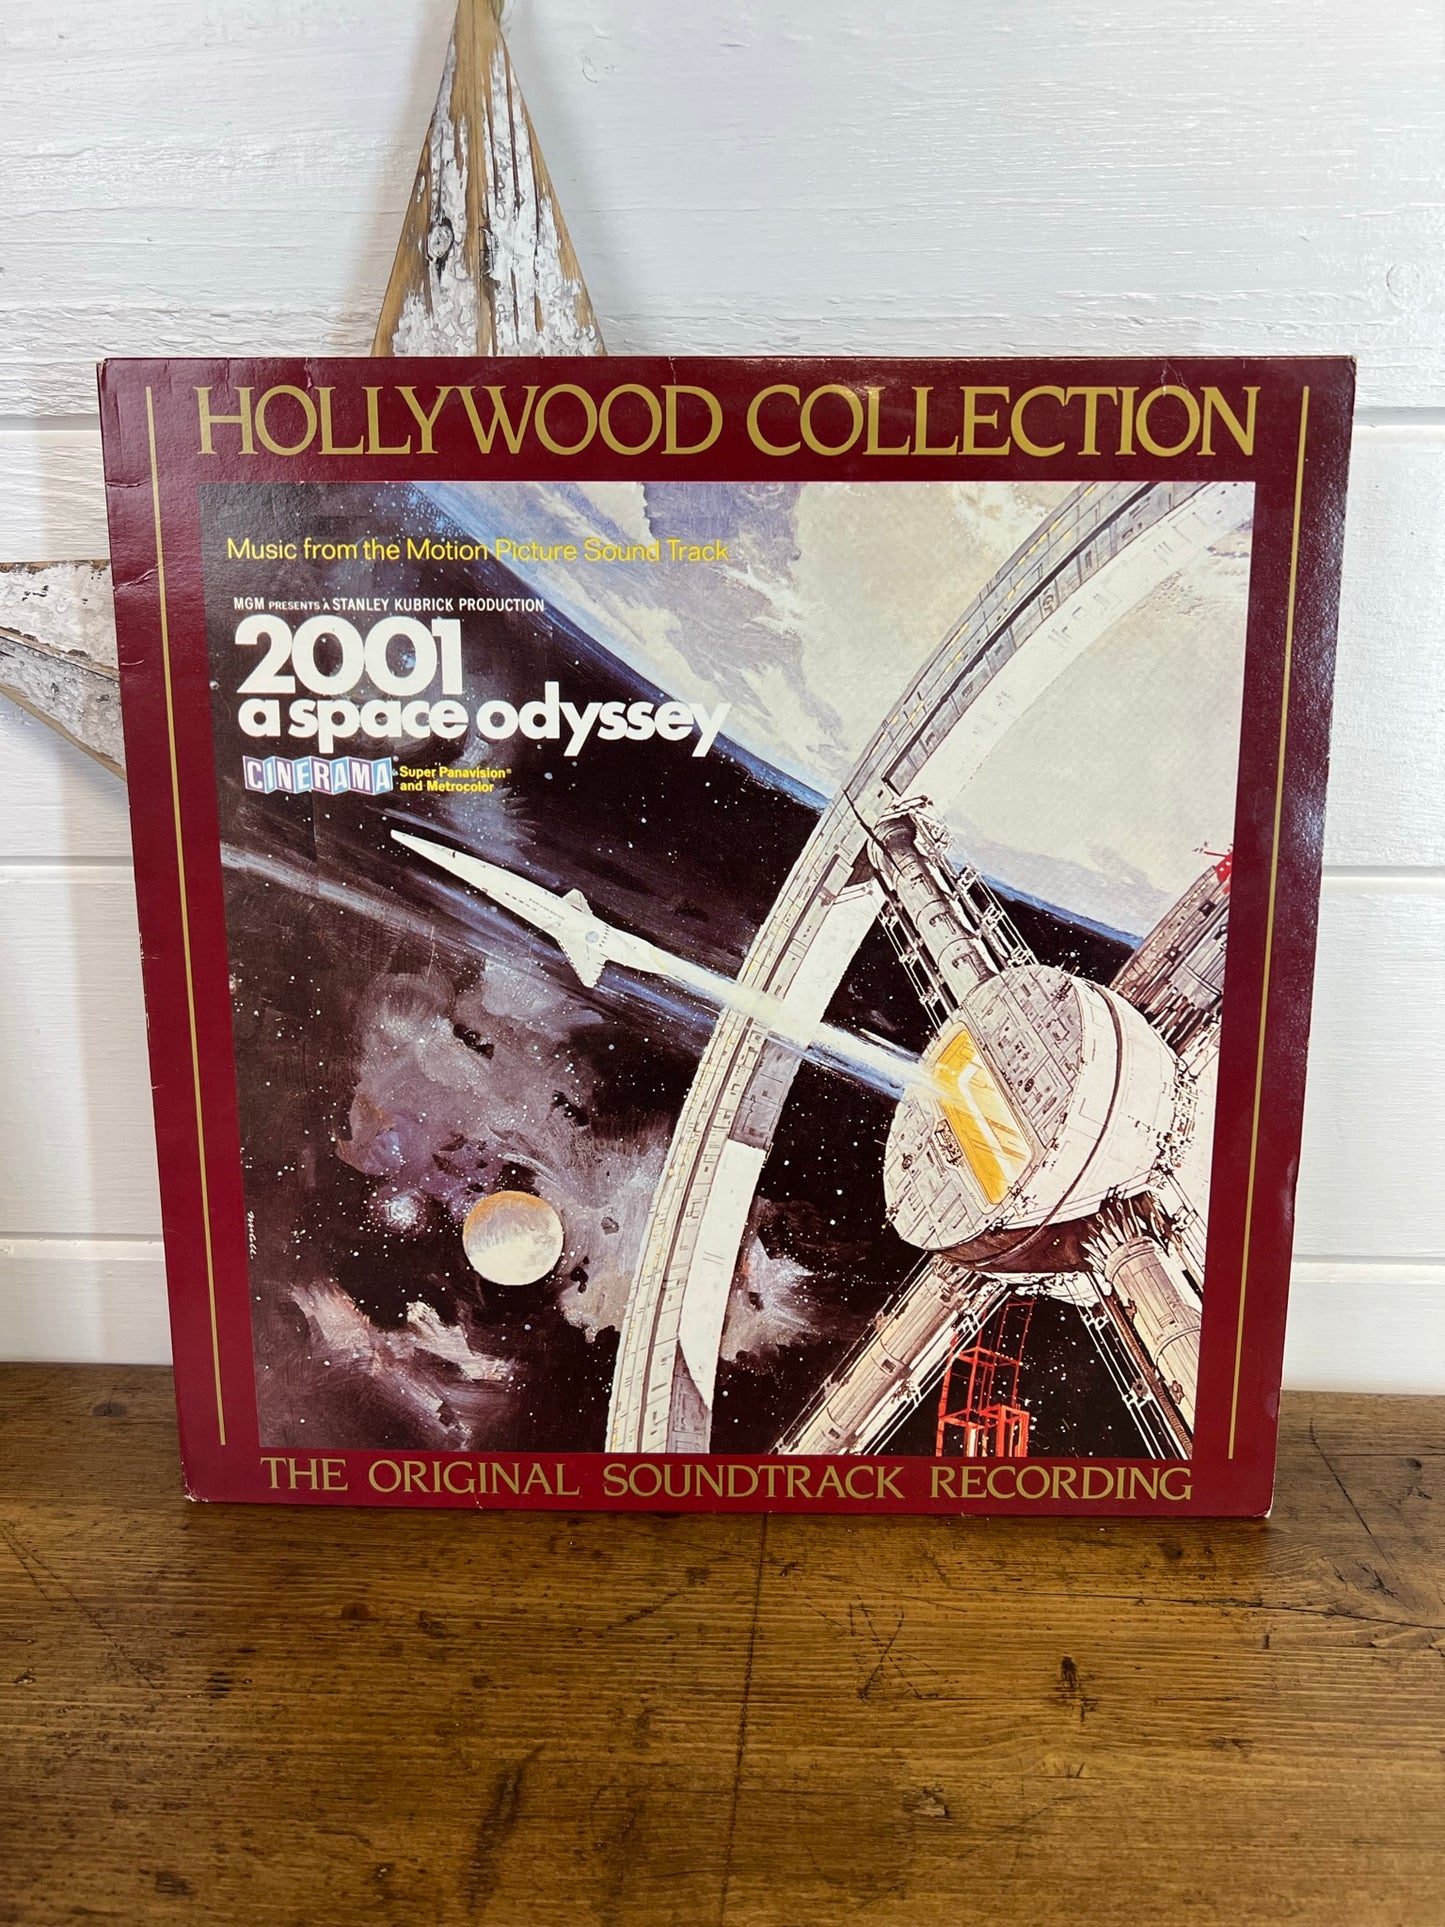 Hollywood Collection 2001 A Space Odyssey LP Vinyl Record CBS 1968